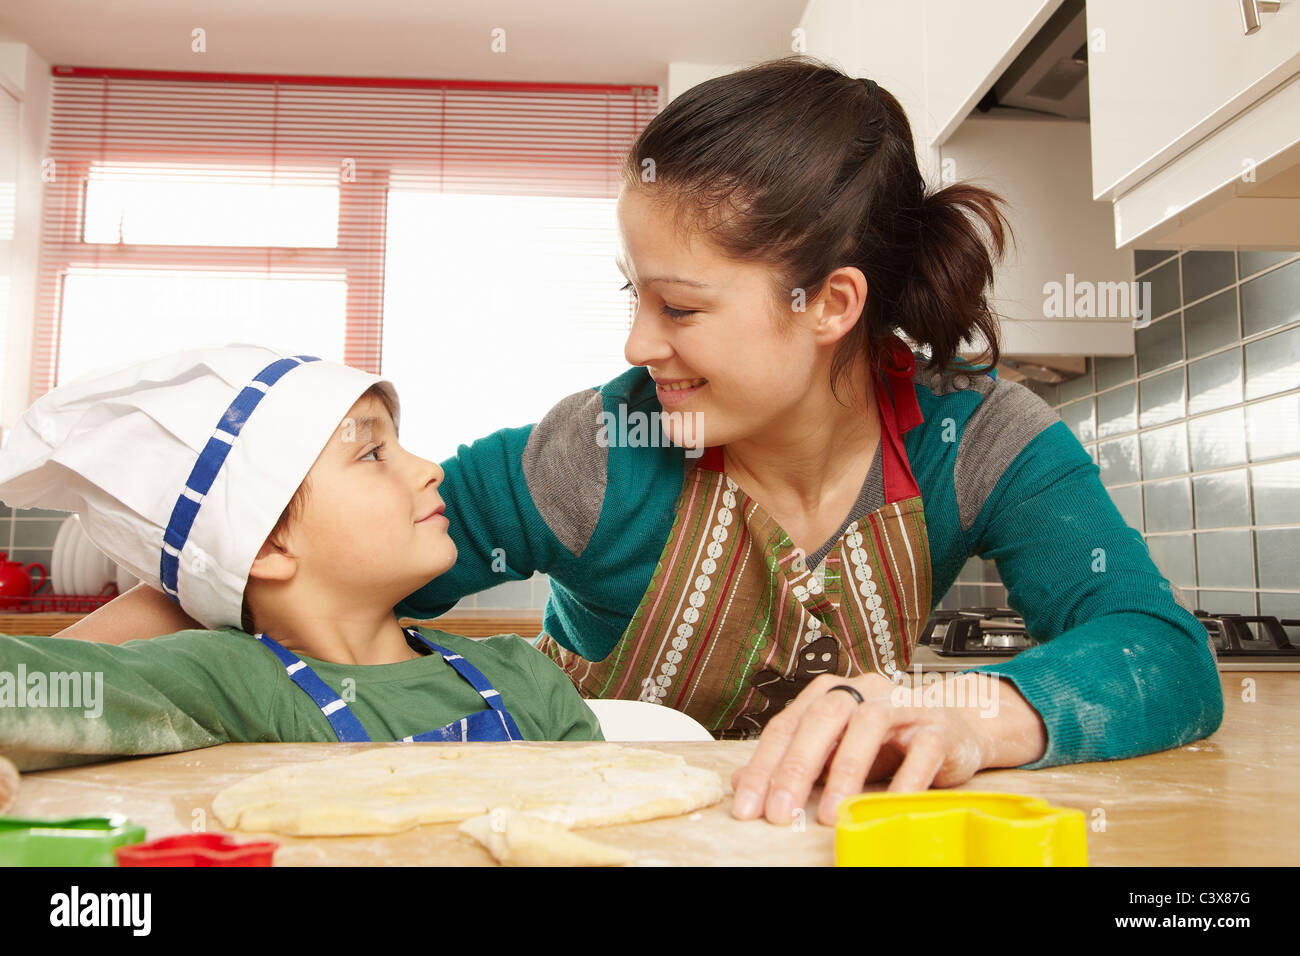 Mother and son having fun in kitchen Stock Photo